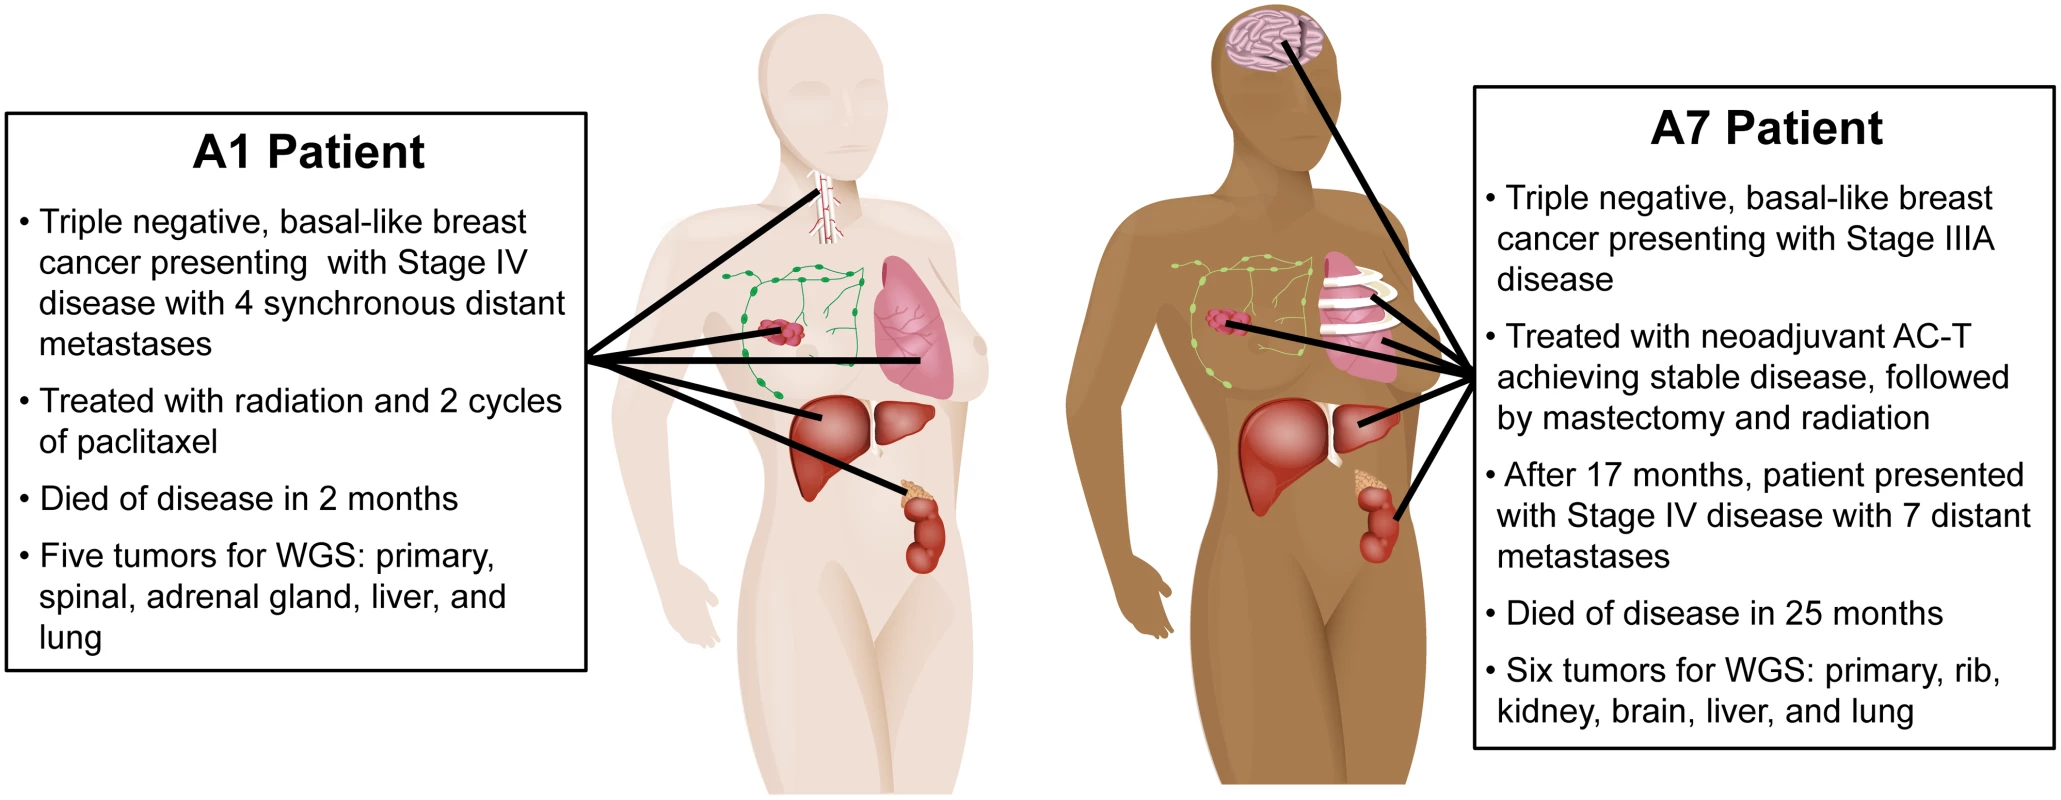 Clinical history and distribution of metastases from patients A1 and A7, who both had clinically triple-negative and basal-like breast cancer.